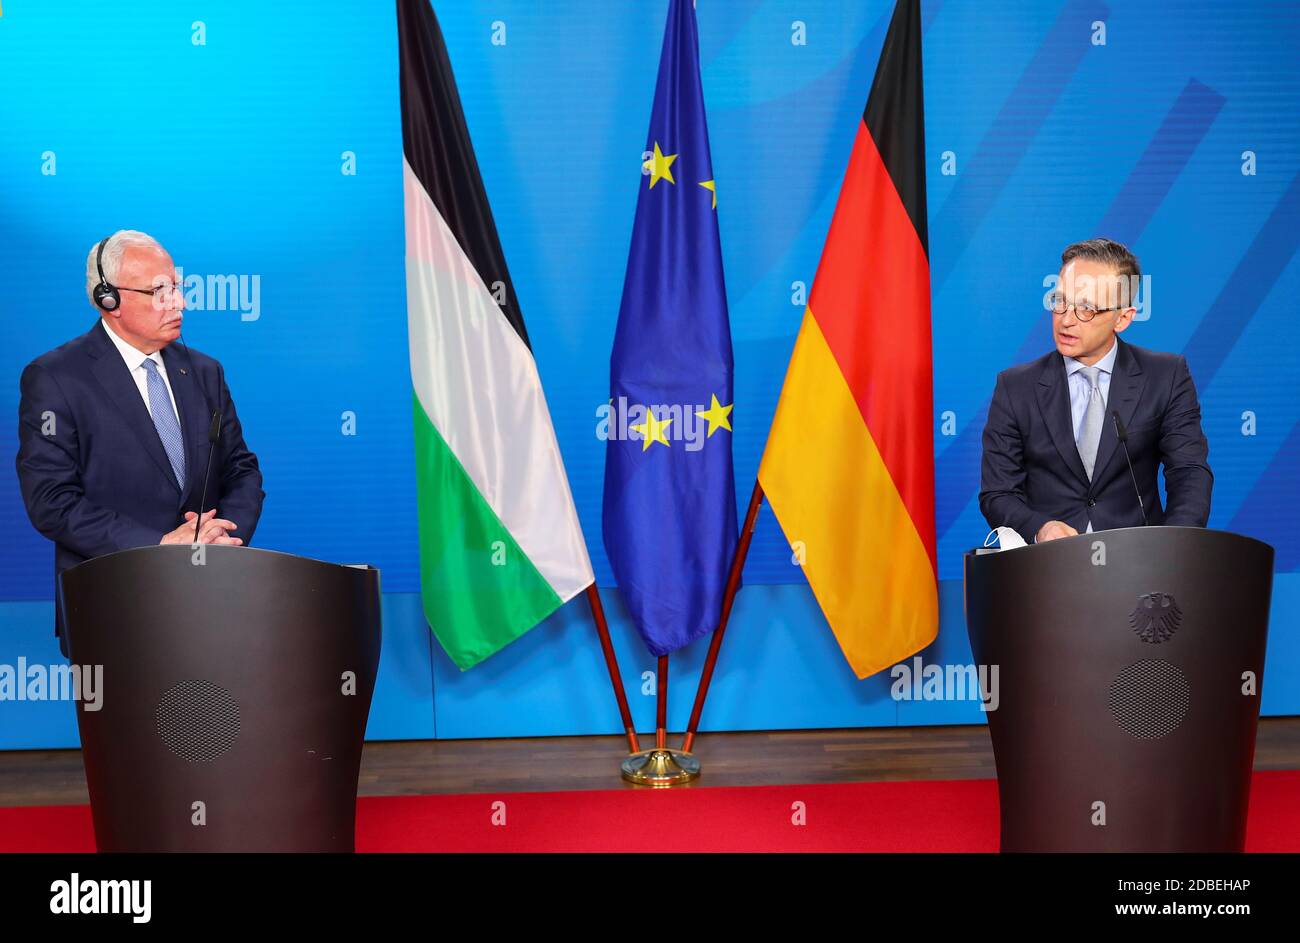 Berlin, Germany. 17th Nov, 2020. Heiko Maas (SPD, r), Foreign Minister, gives a joint press conference with his Palestinian counterpart Riad al-Maliki. Credit: Hannibal Hanschke/Reuters Images Europe/Pool/dpa/Alamy Live News Stock Photo